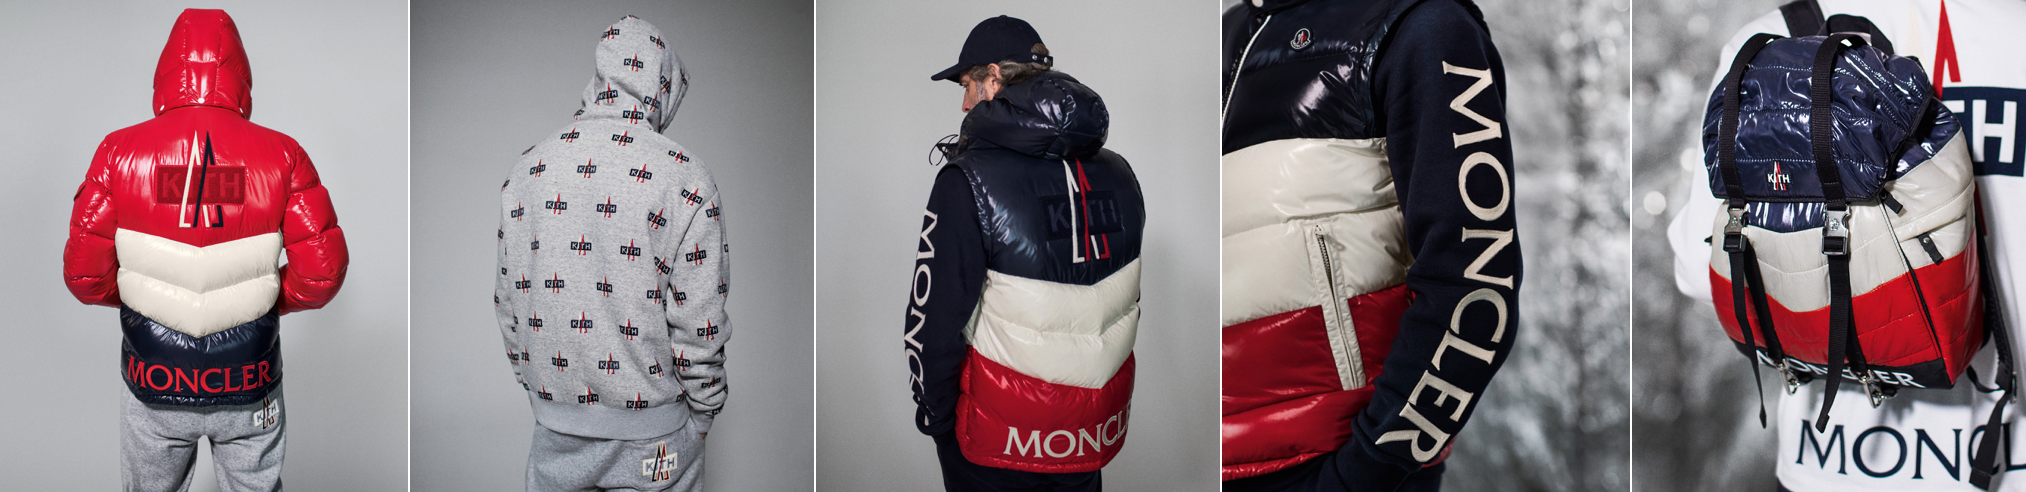 Kith And Moncler Have Combined To Create A Streetwear X Luxury Hybrid